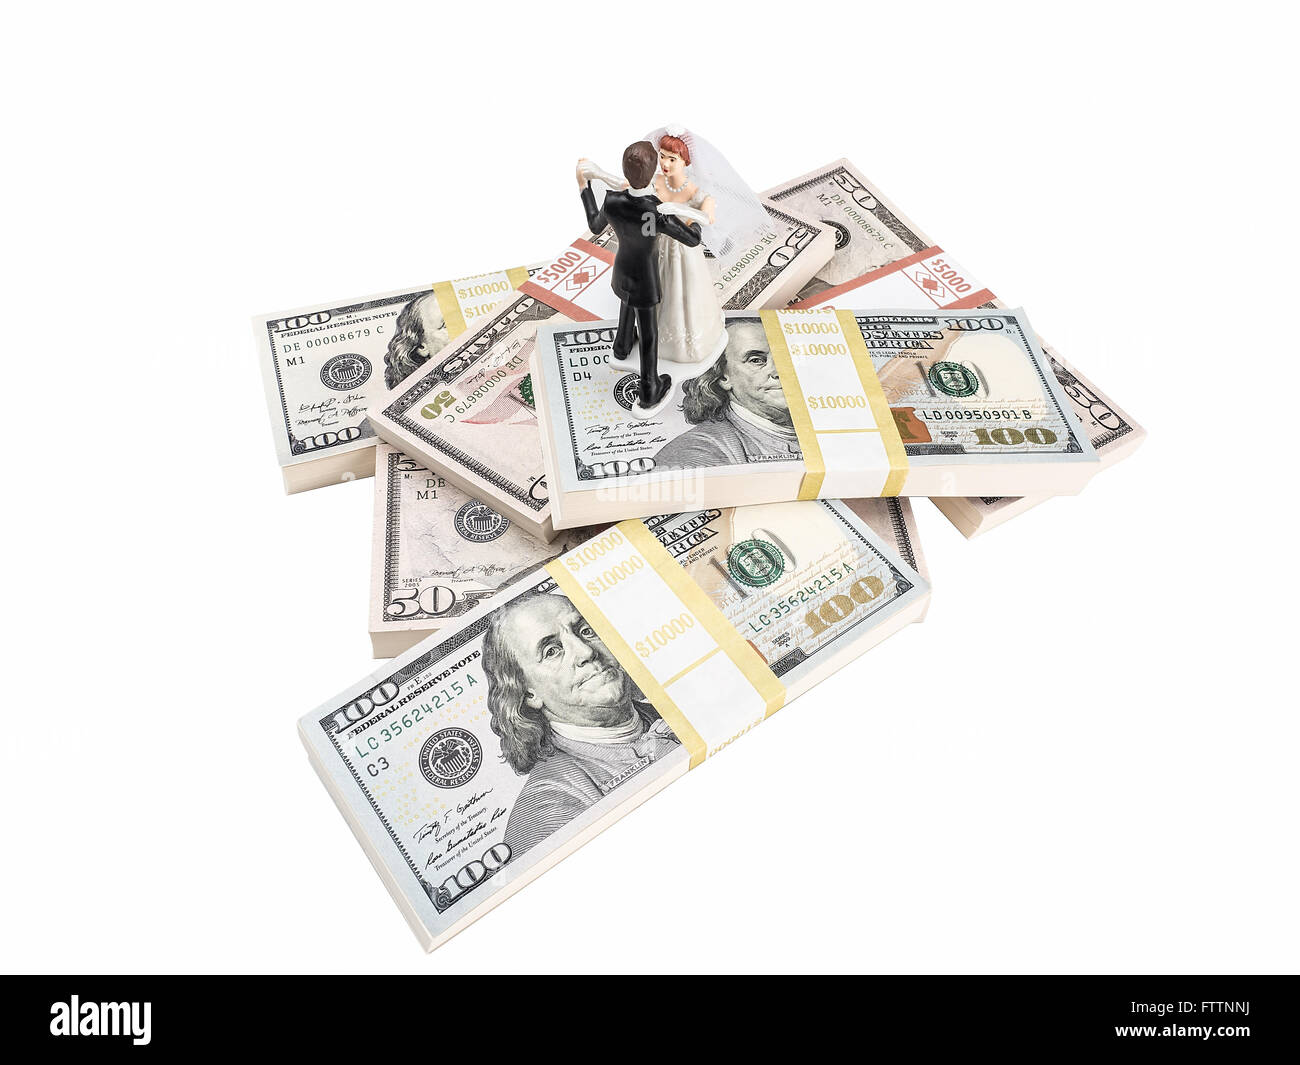 Photograph of bride and groom figurines dancing on top of stacks of U.S. paper currency, suggesting the idea of an expensive wed Stock Photo